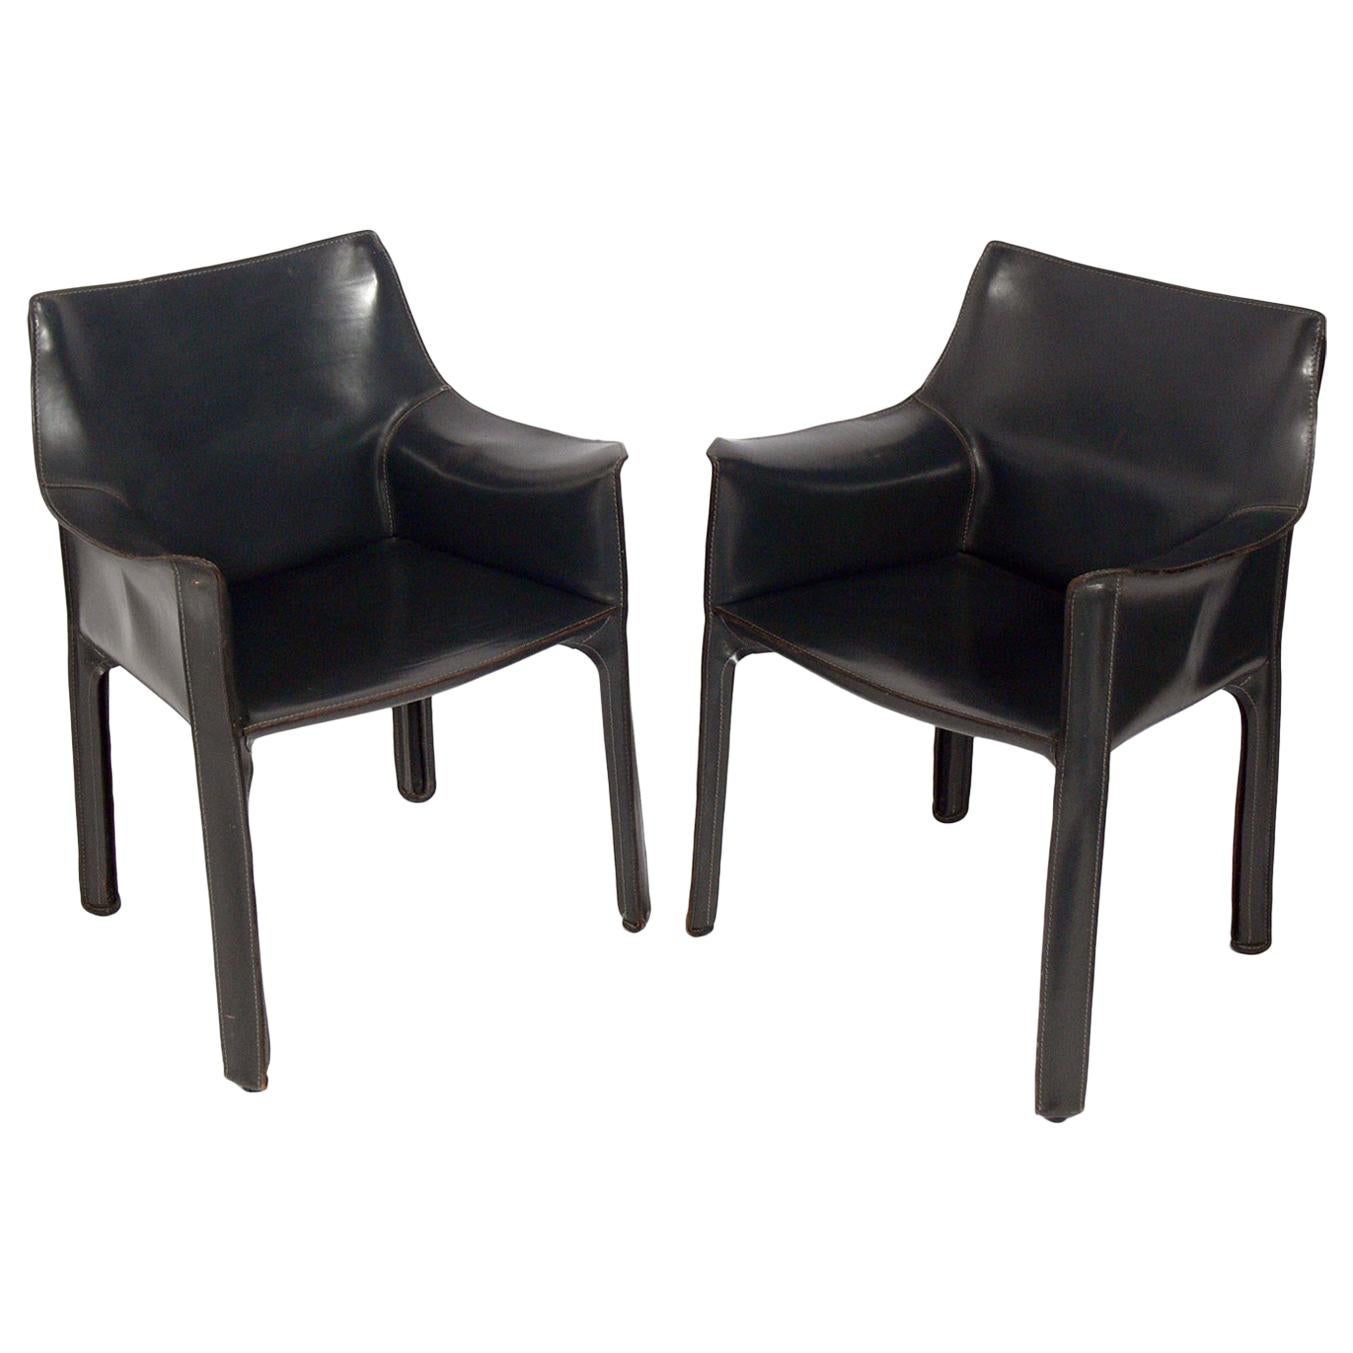 Pair of Charcoal Gray Leather Cab Chairs by Mario Bellini for Cassina